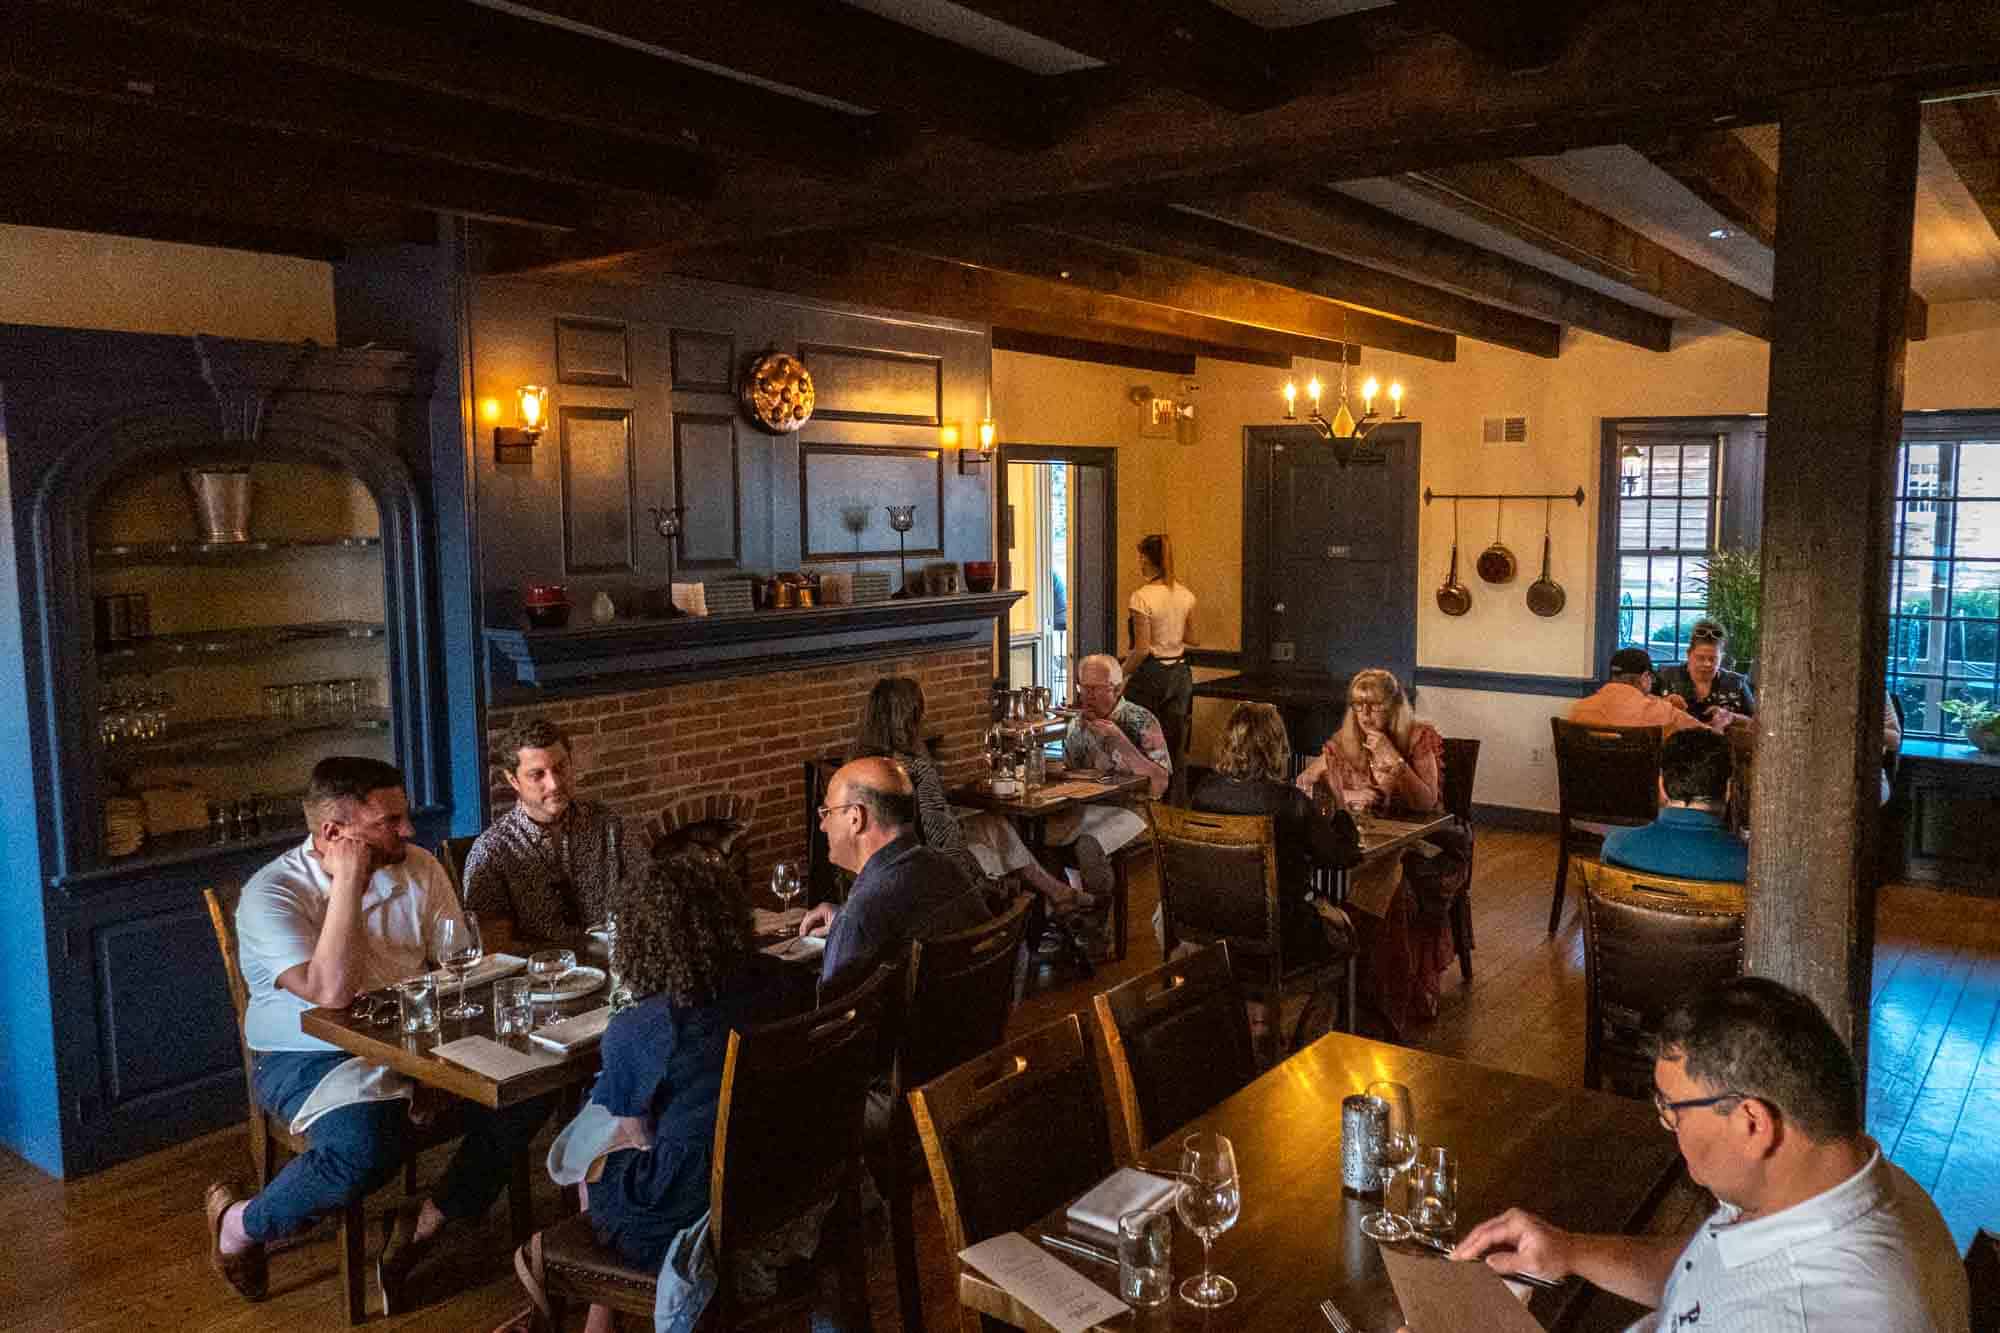 People seated in the dining room at Ground Provisions